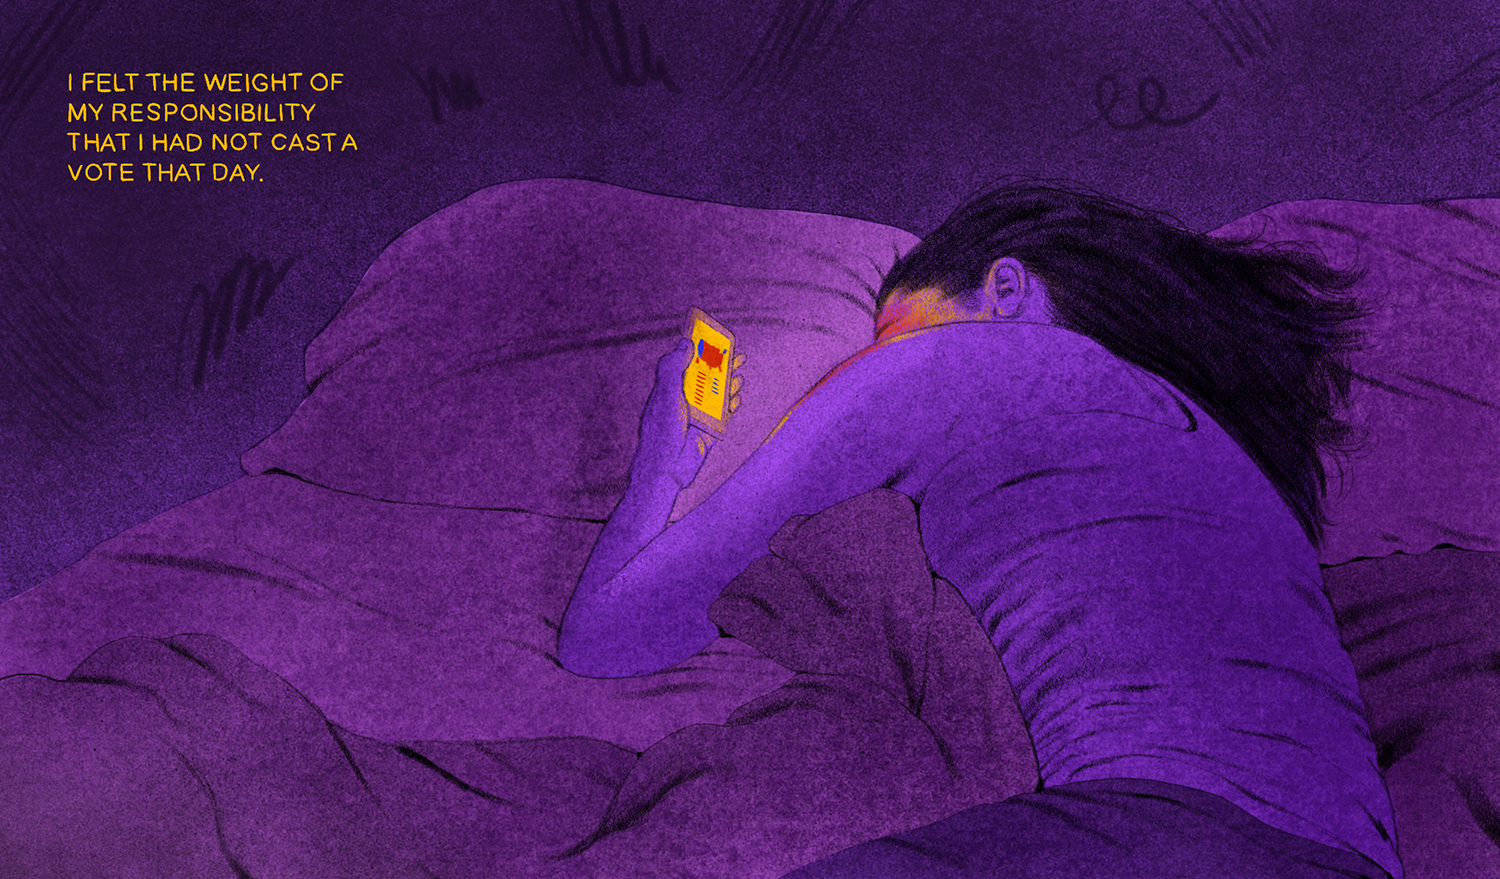 Illustration of a woman lying on a bed, staring at her phone with a election map. The text on the image reads "I felt the weight of my responsibility that I had not cast a vote that day."